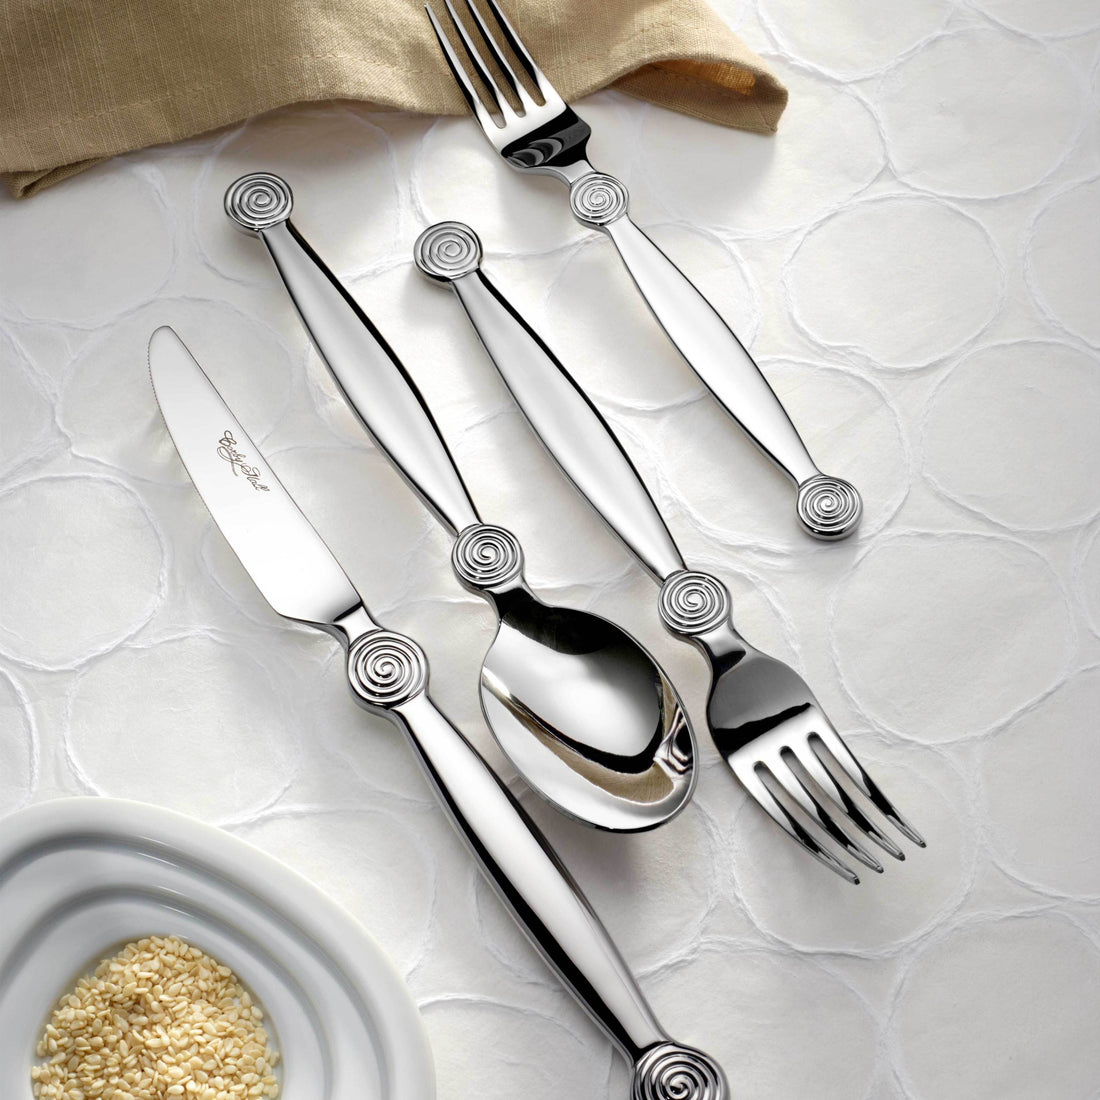 Miami flatware by Corby Hall